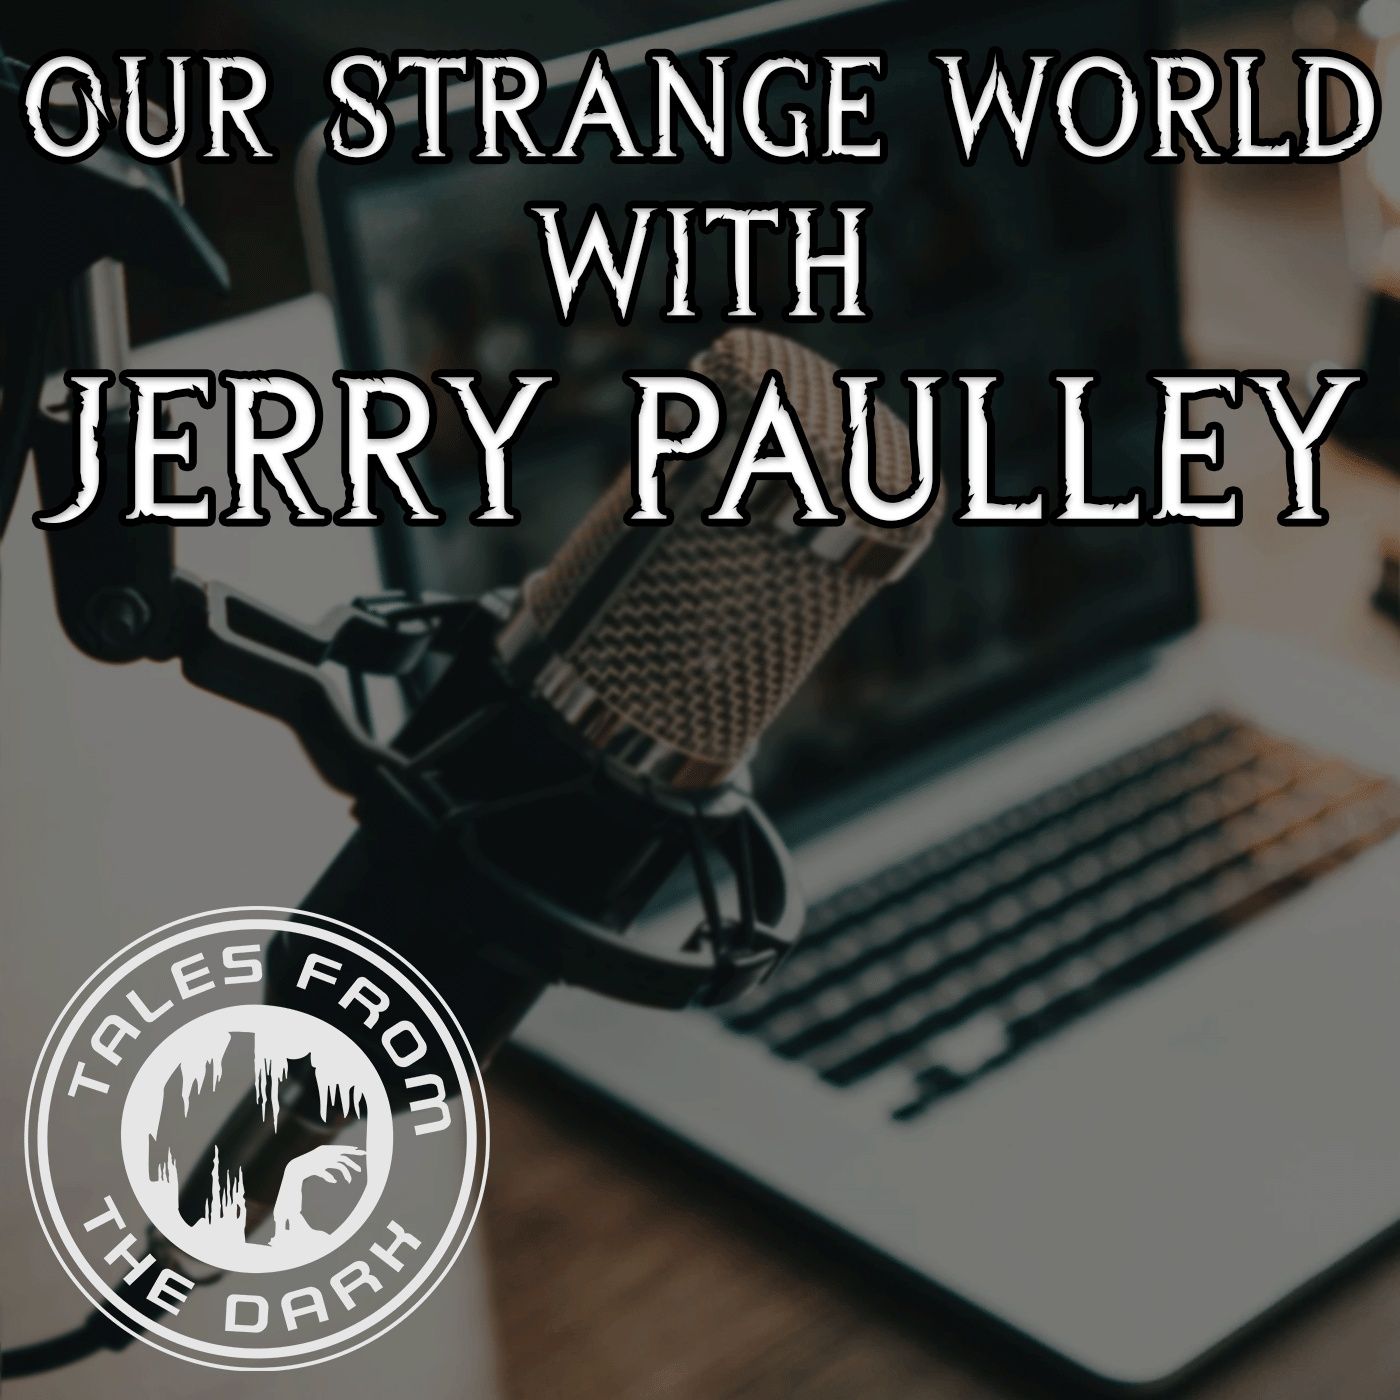 Our Strange World With Jerry Paulley